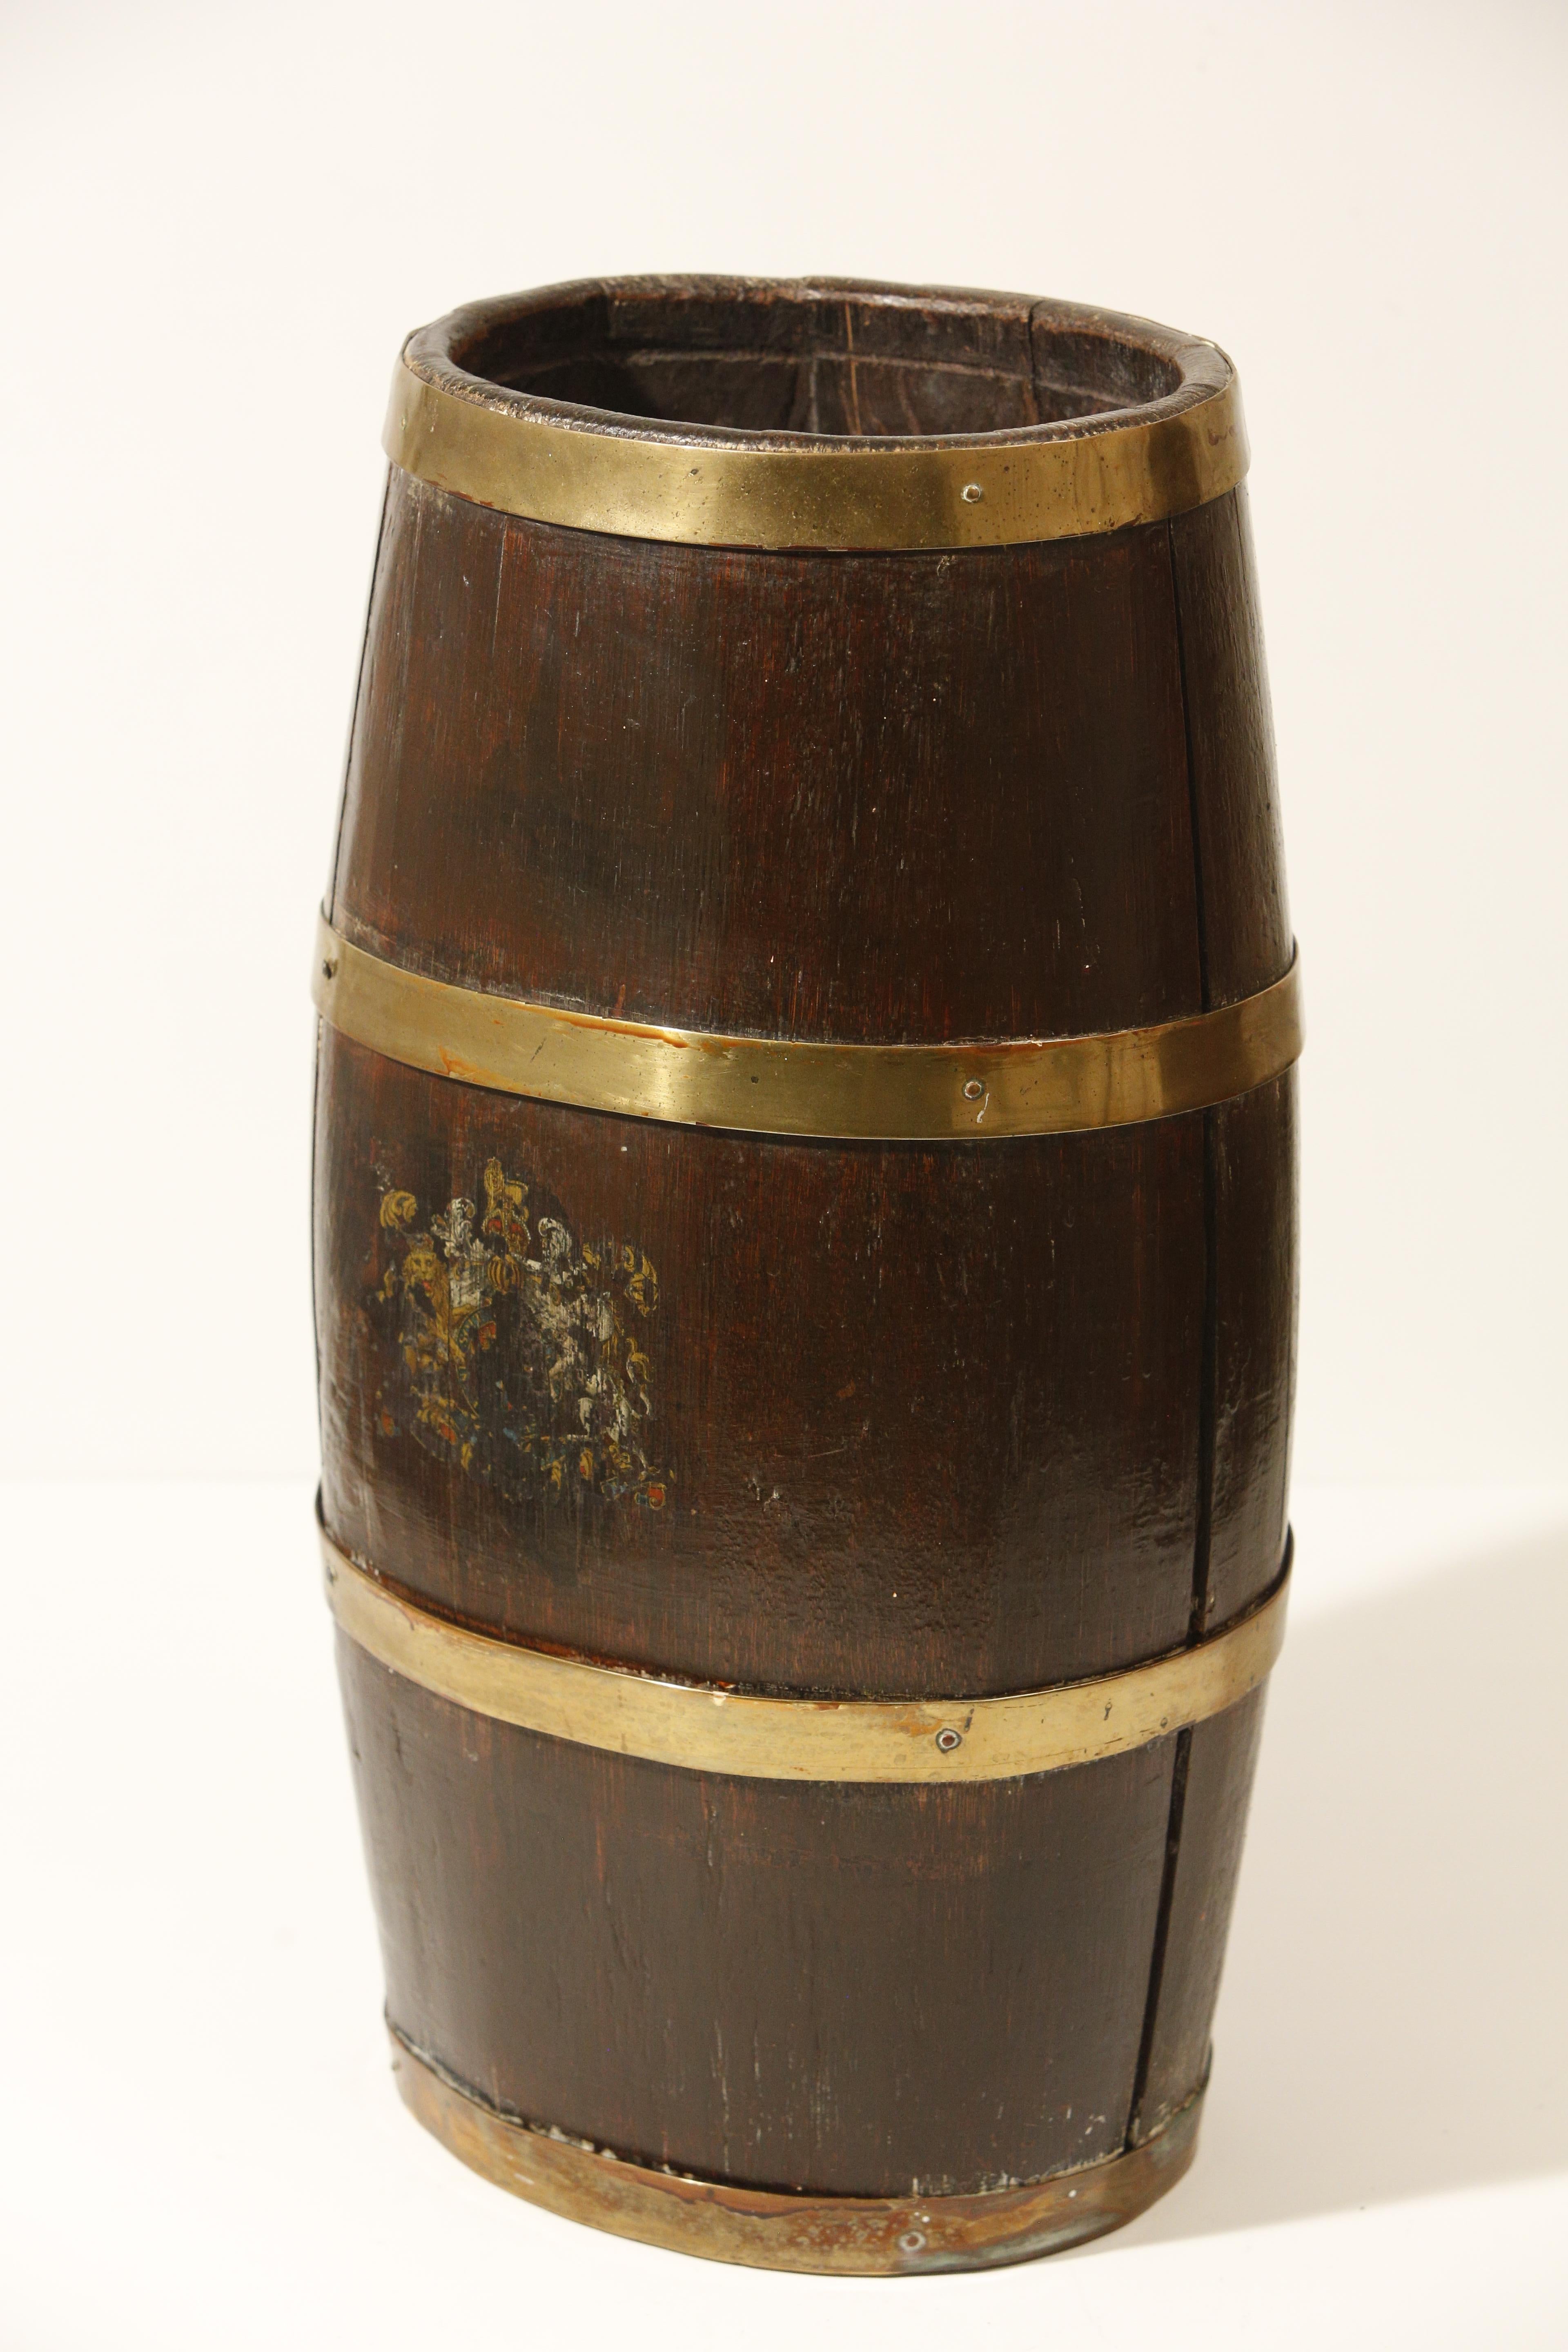 Charming 19th century brass bound coopered oak umbrella stick stand with lovely old wax patina.

Created in England this barrel features a sturdy oak body made vertical slats contrasted by the golden tones of the horizontal brass braces that